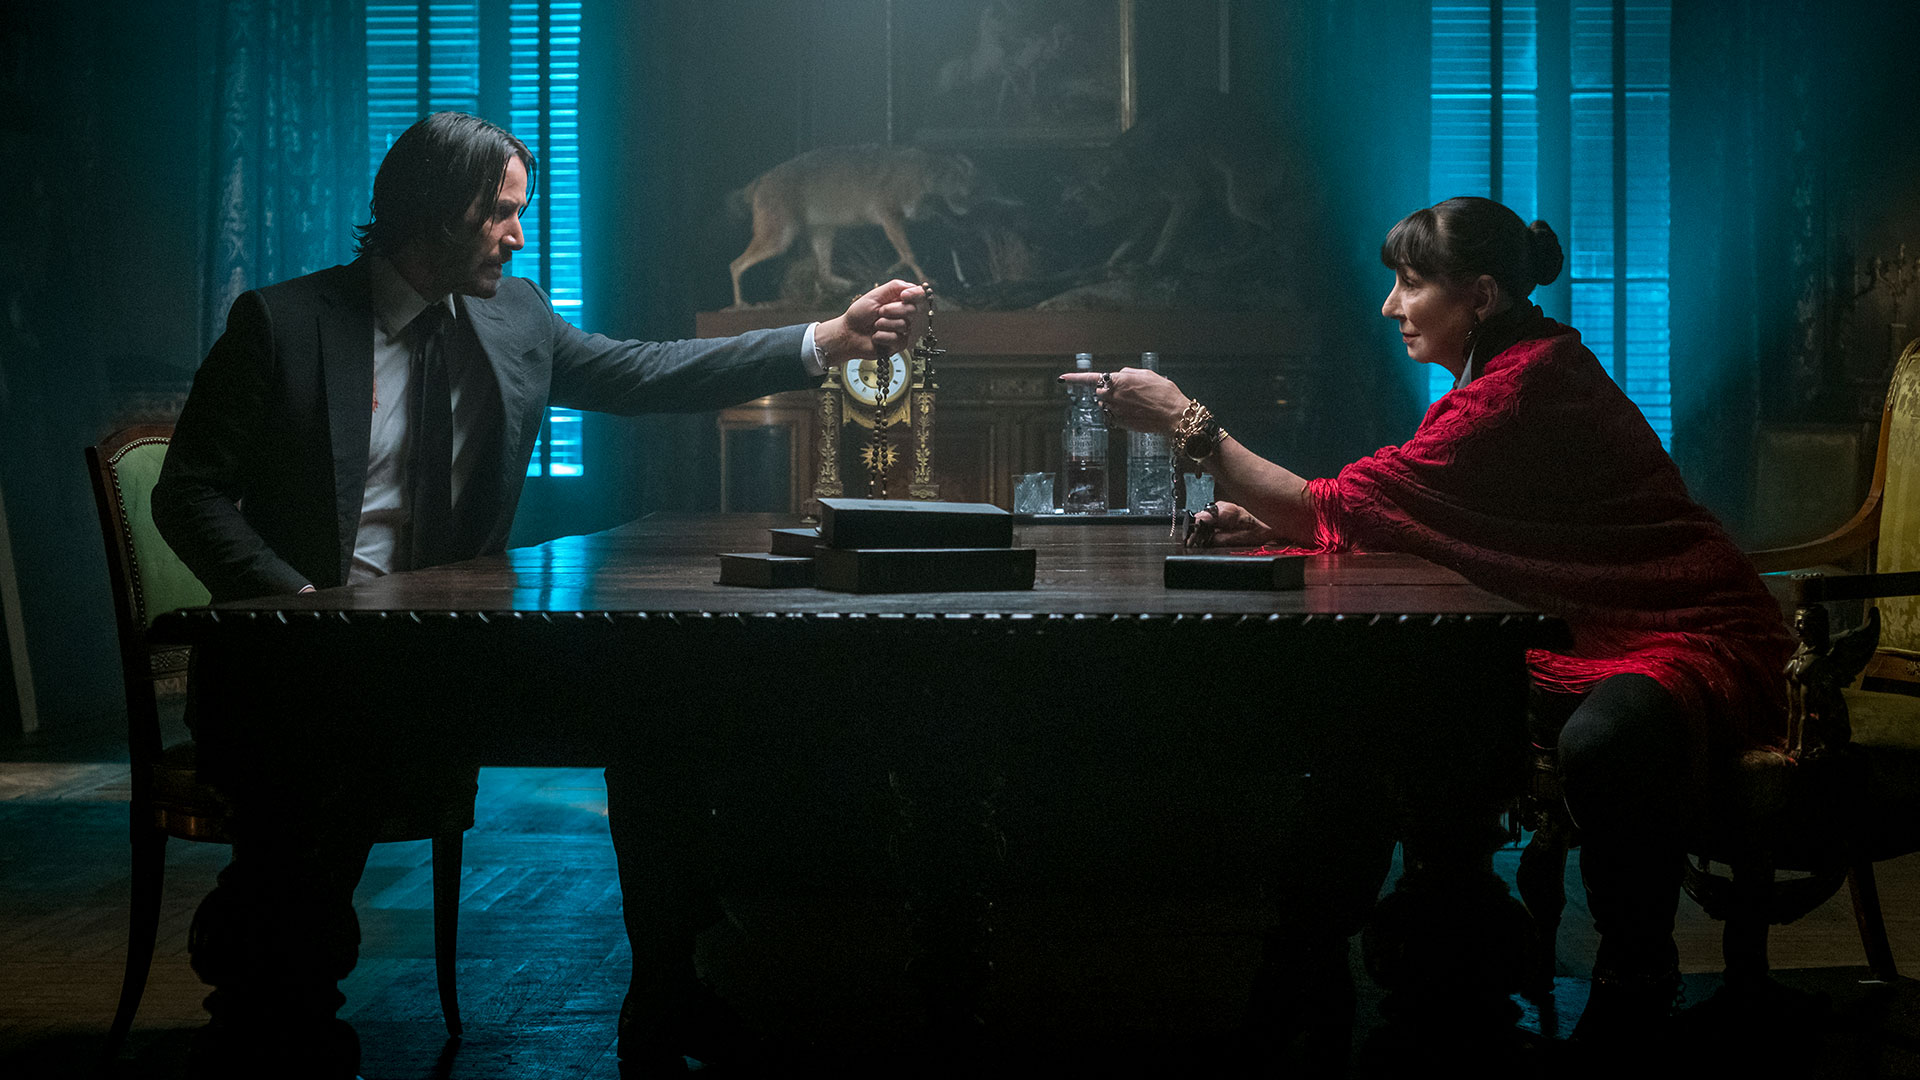 John Wick: Chapter 4' Available on Digital: How to Watch – Billboard